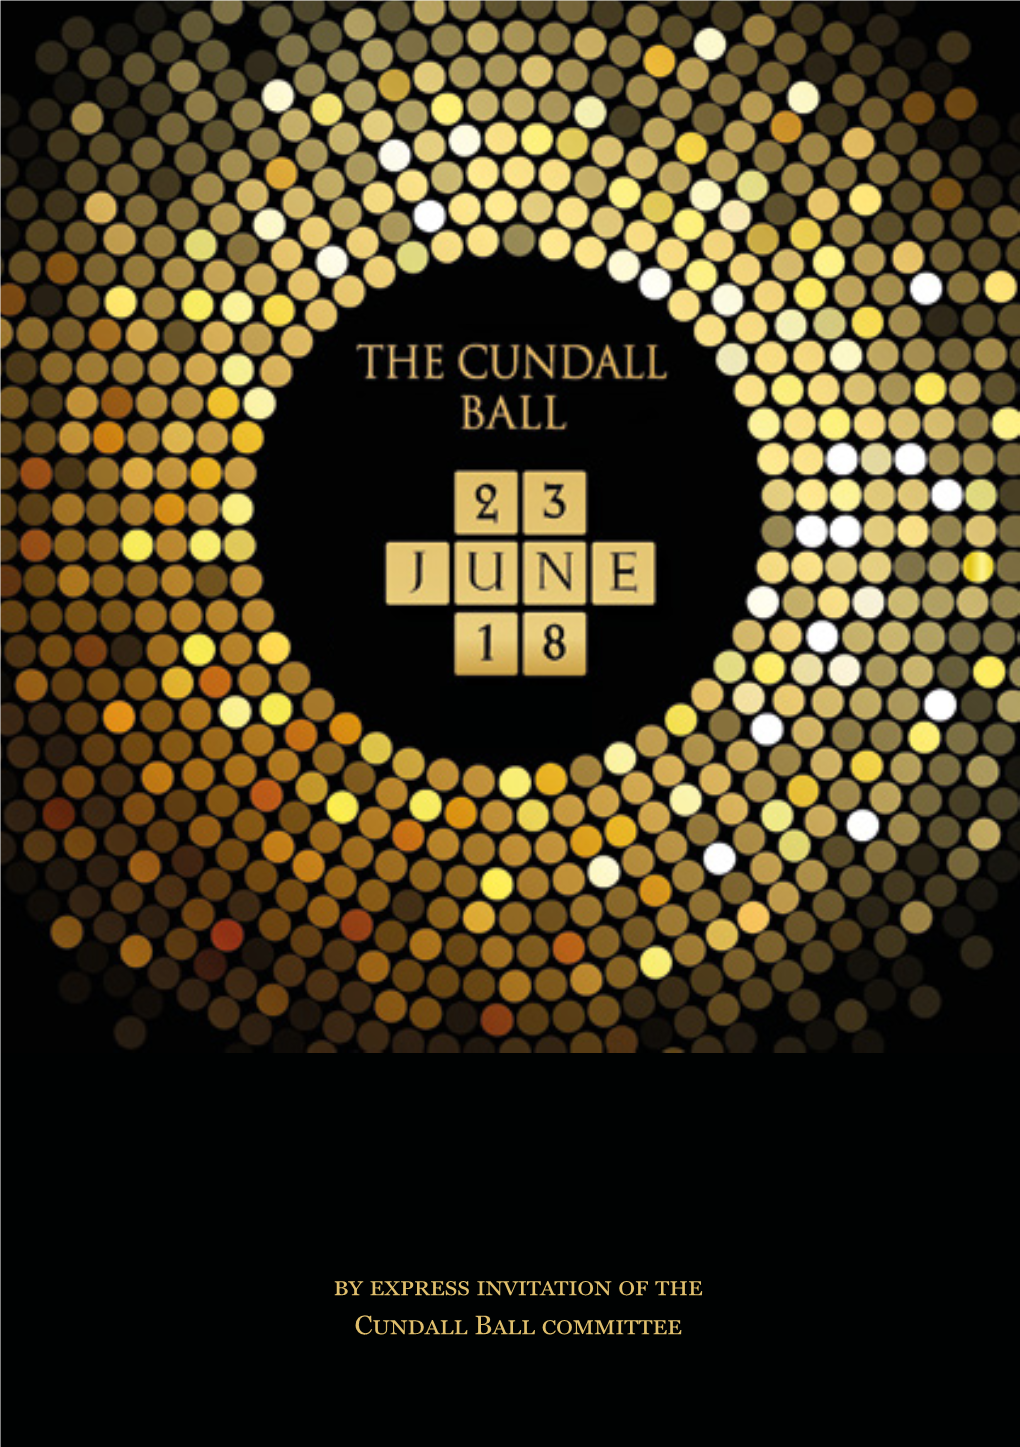 By Express Invitation of the Cundall Ball Committee